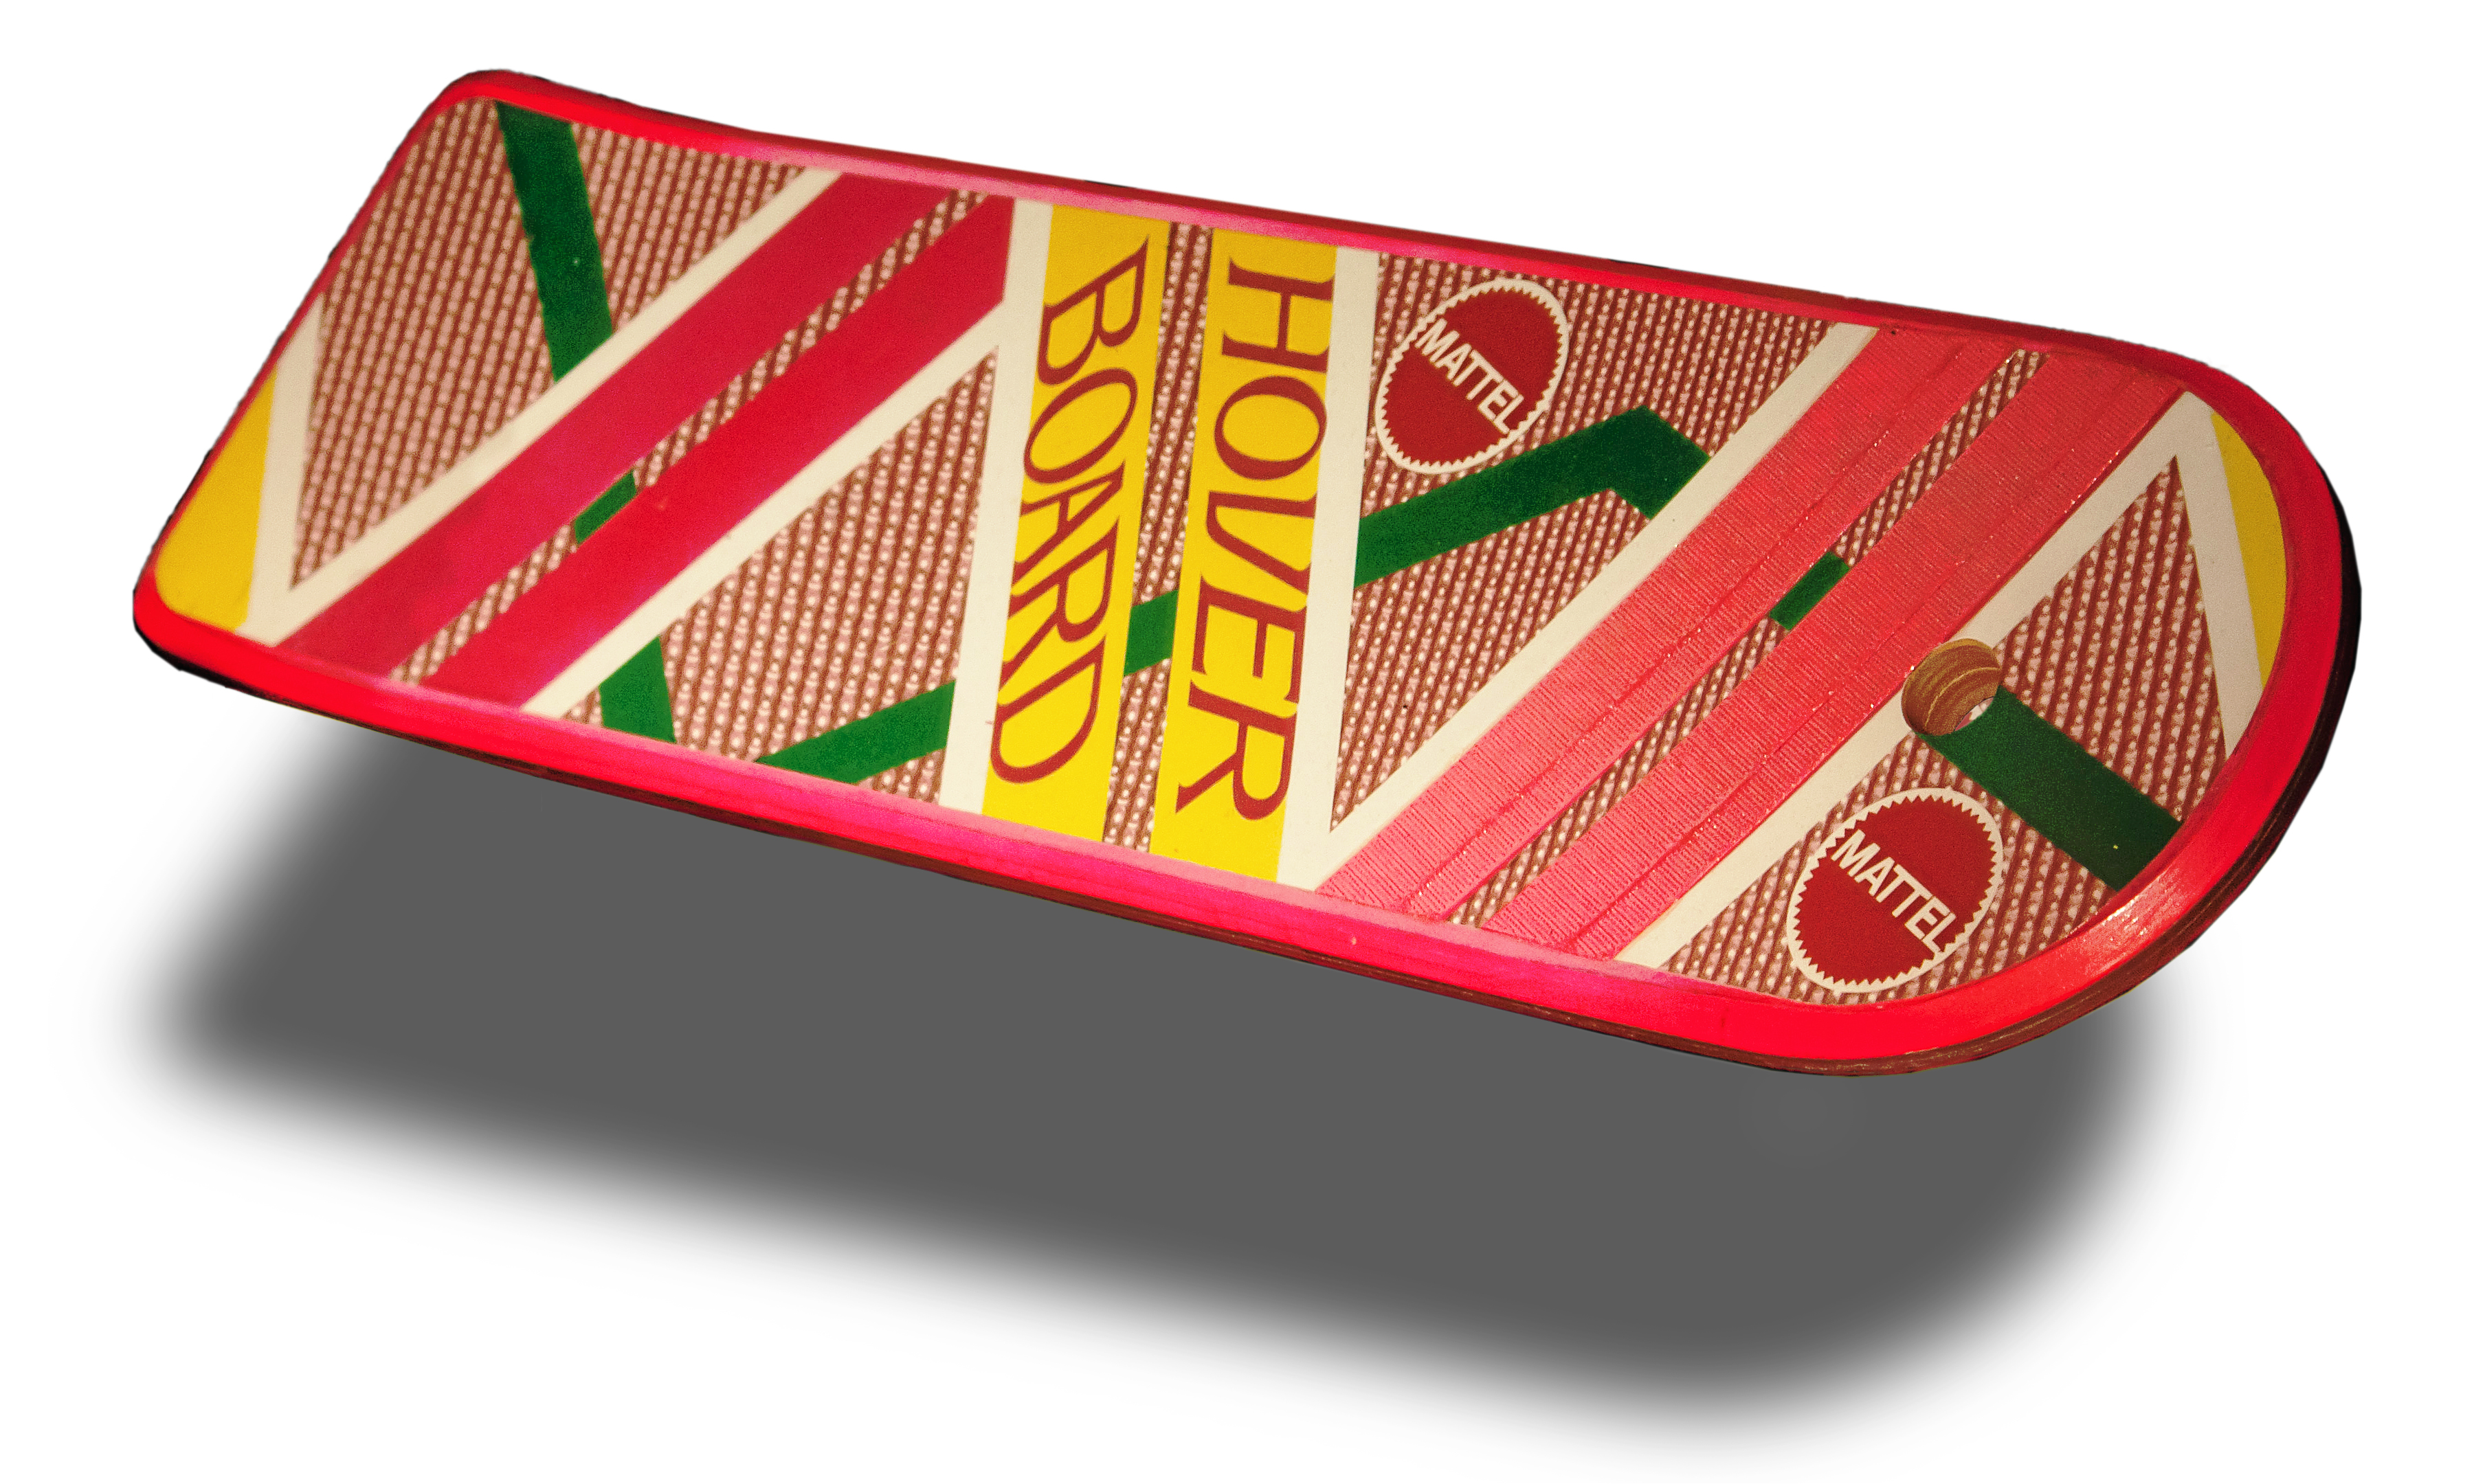 The Back To The Future hoverboard